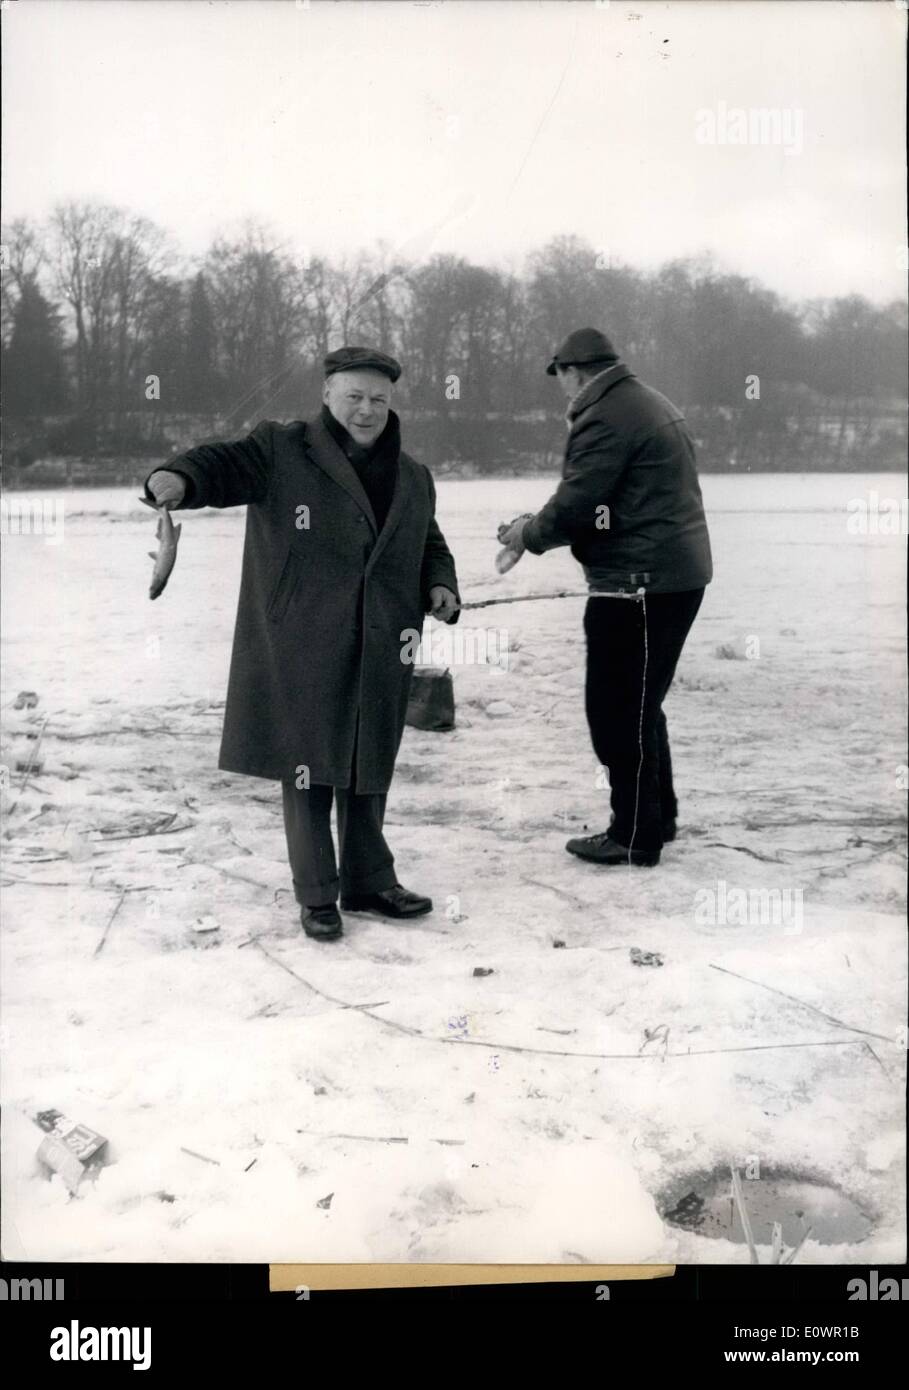 Feb. 02, 1964 - These anglers are thickly hooded and have no problem braving the cold snap gripping Berlin as they stand on the Stock Photo